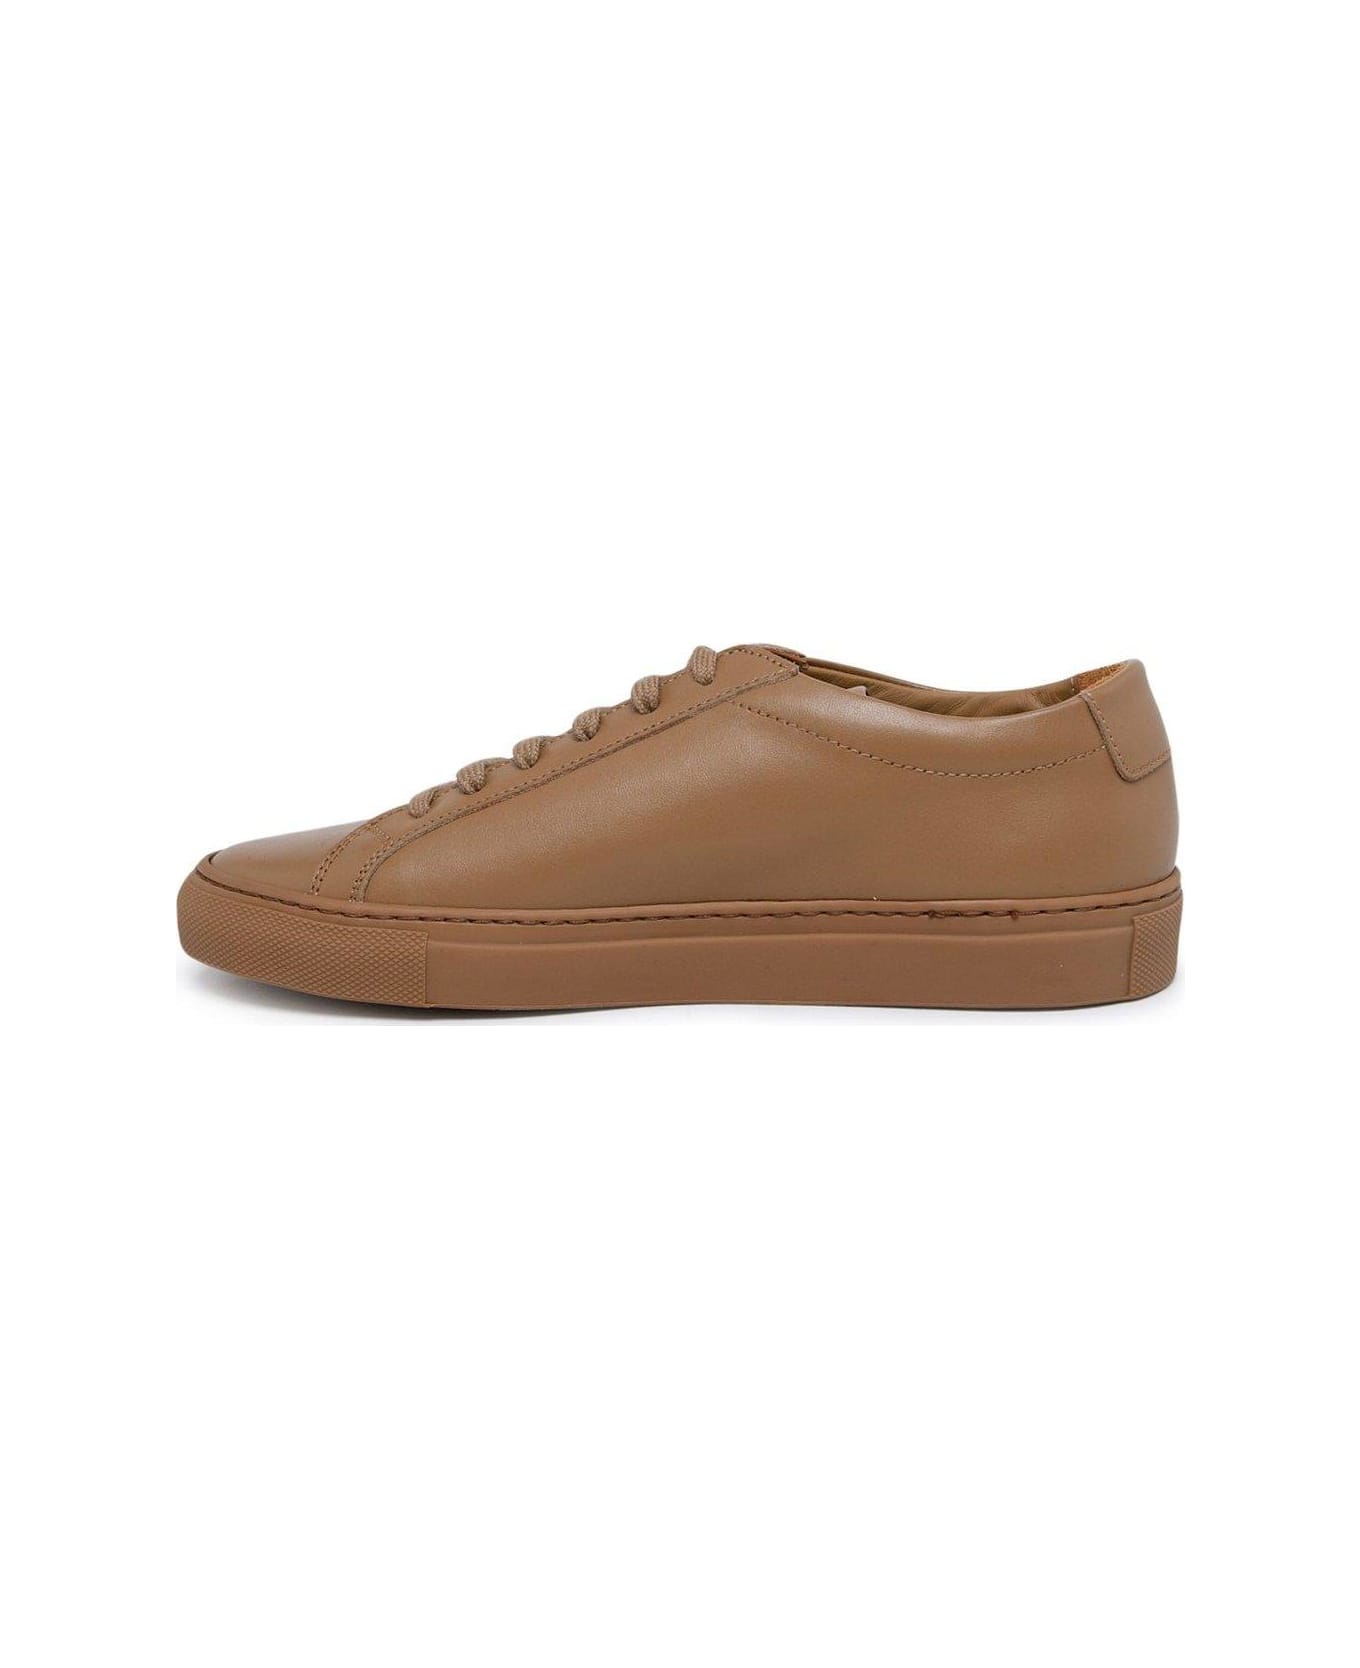 Common Projects Original Achilles Sneakers - BROWN